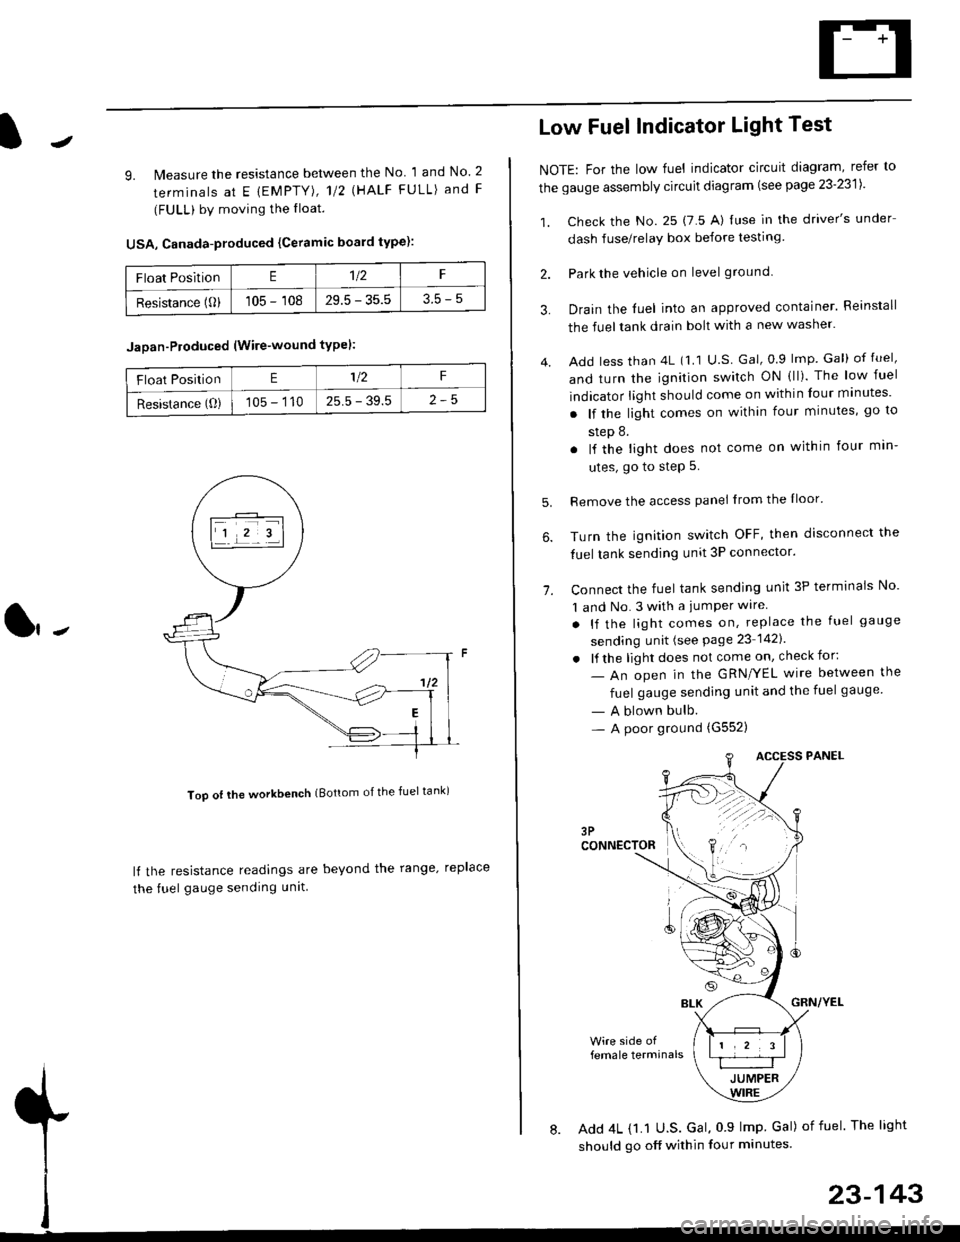 HONDA CIVIC 1996 6.G Workshop Manual J
9. lMeasure the resistance between the No 1 and No. 2
terminals at E {EMPTY), 112 \HALF FULL) and F
(FULL) by moving the lloat.
USA, Canada-produced {Ceramic board type):
Too ot lhe workbench (Botto